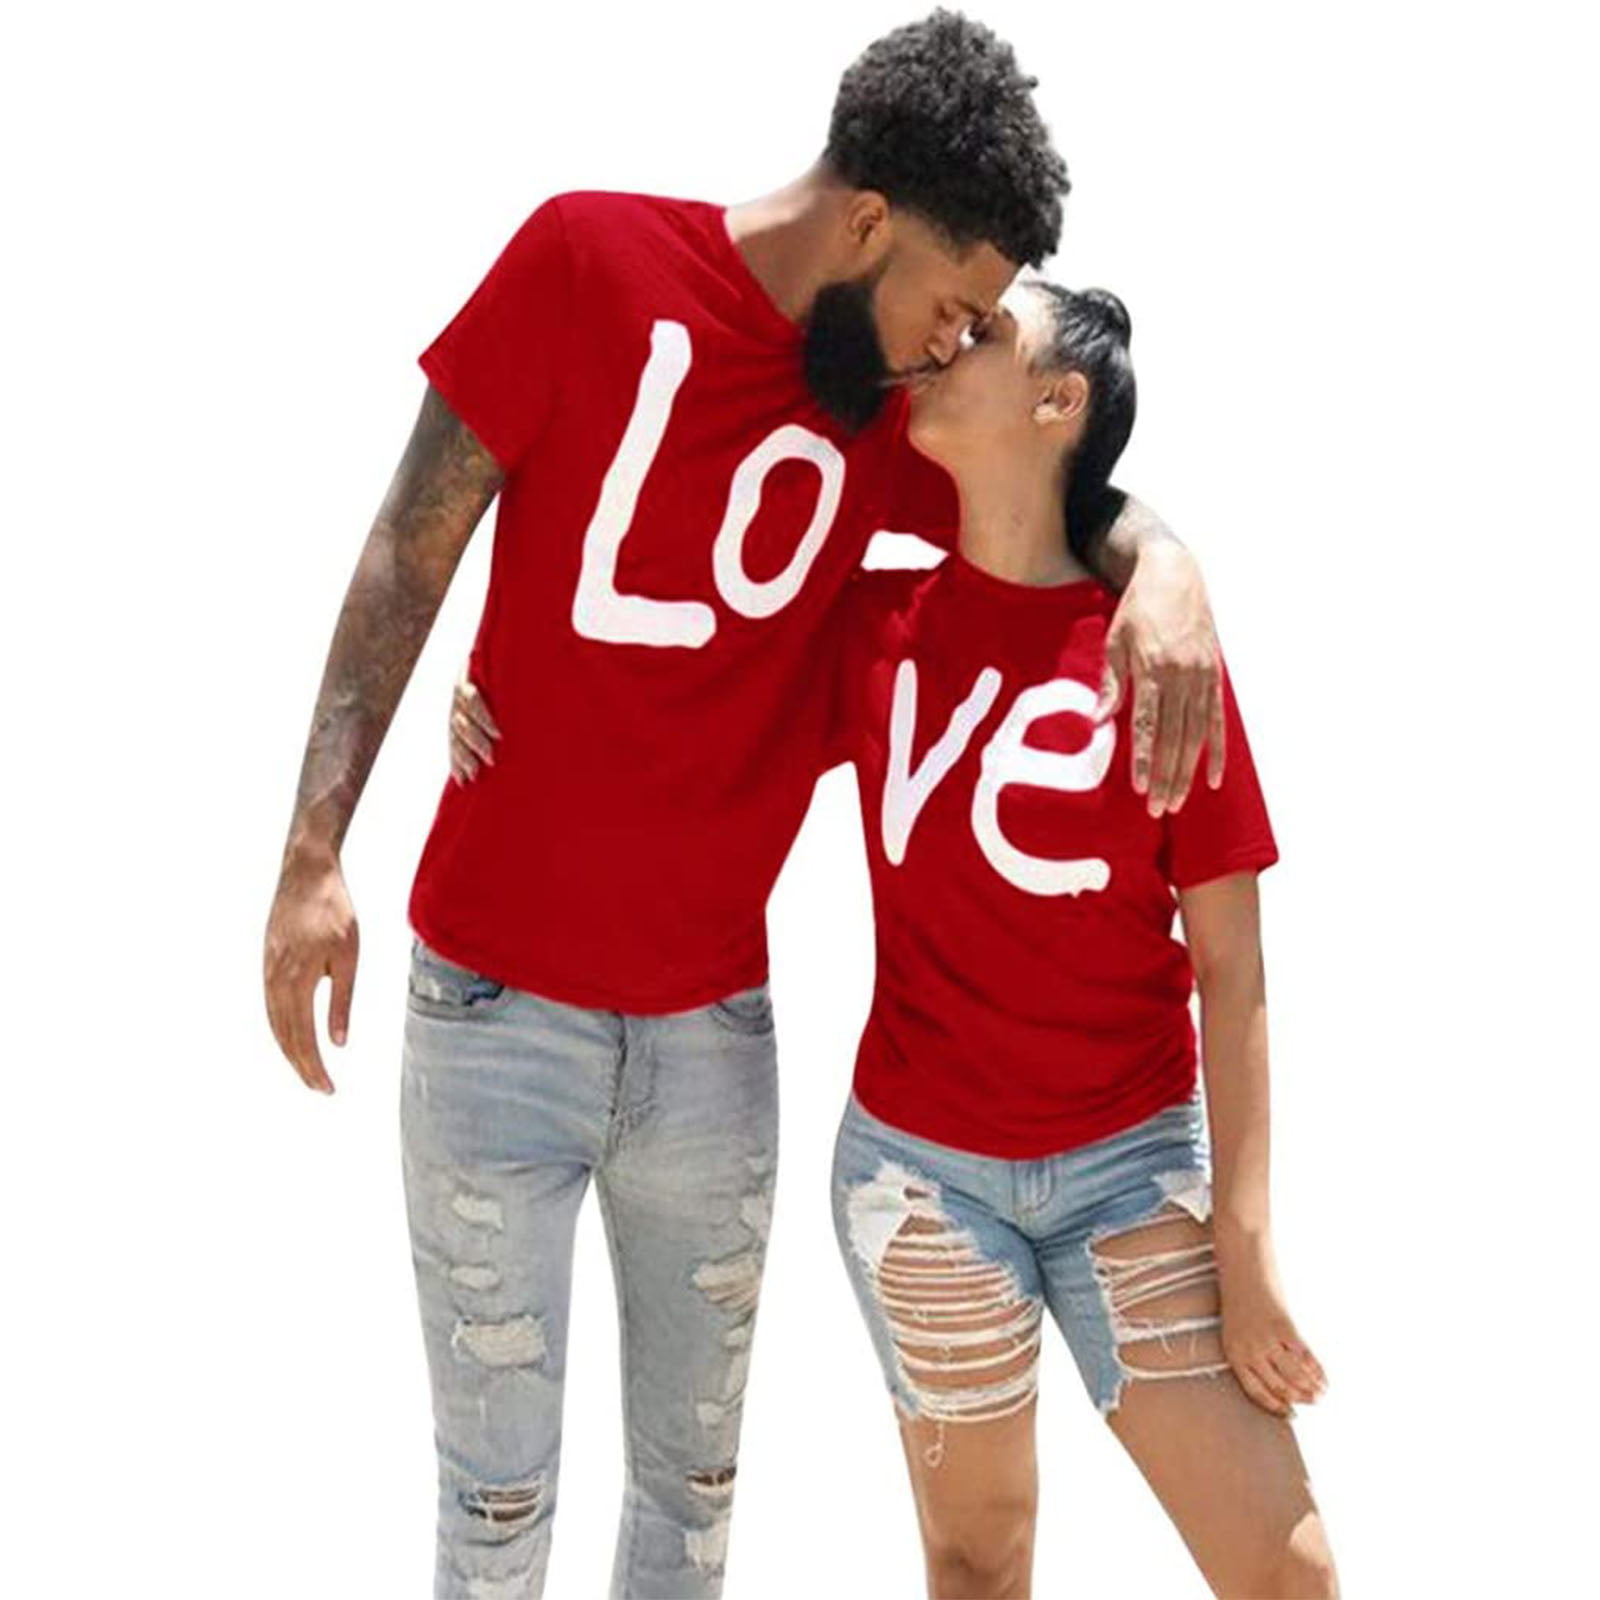 Funny Couples Tee Gift for Him, Anniversary Shirt His and Her Valentines Day Shirt Matching Couples Funny Matching Couple Shirts